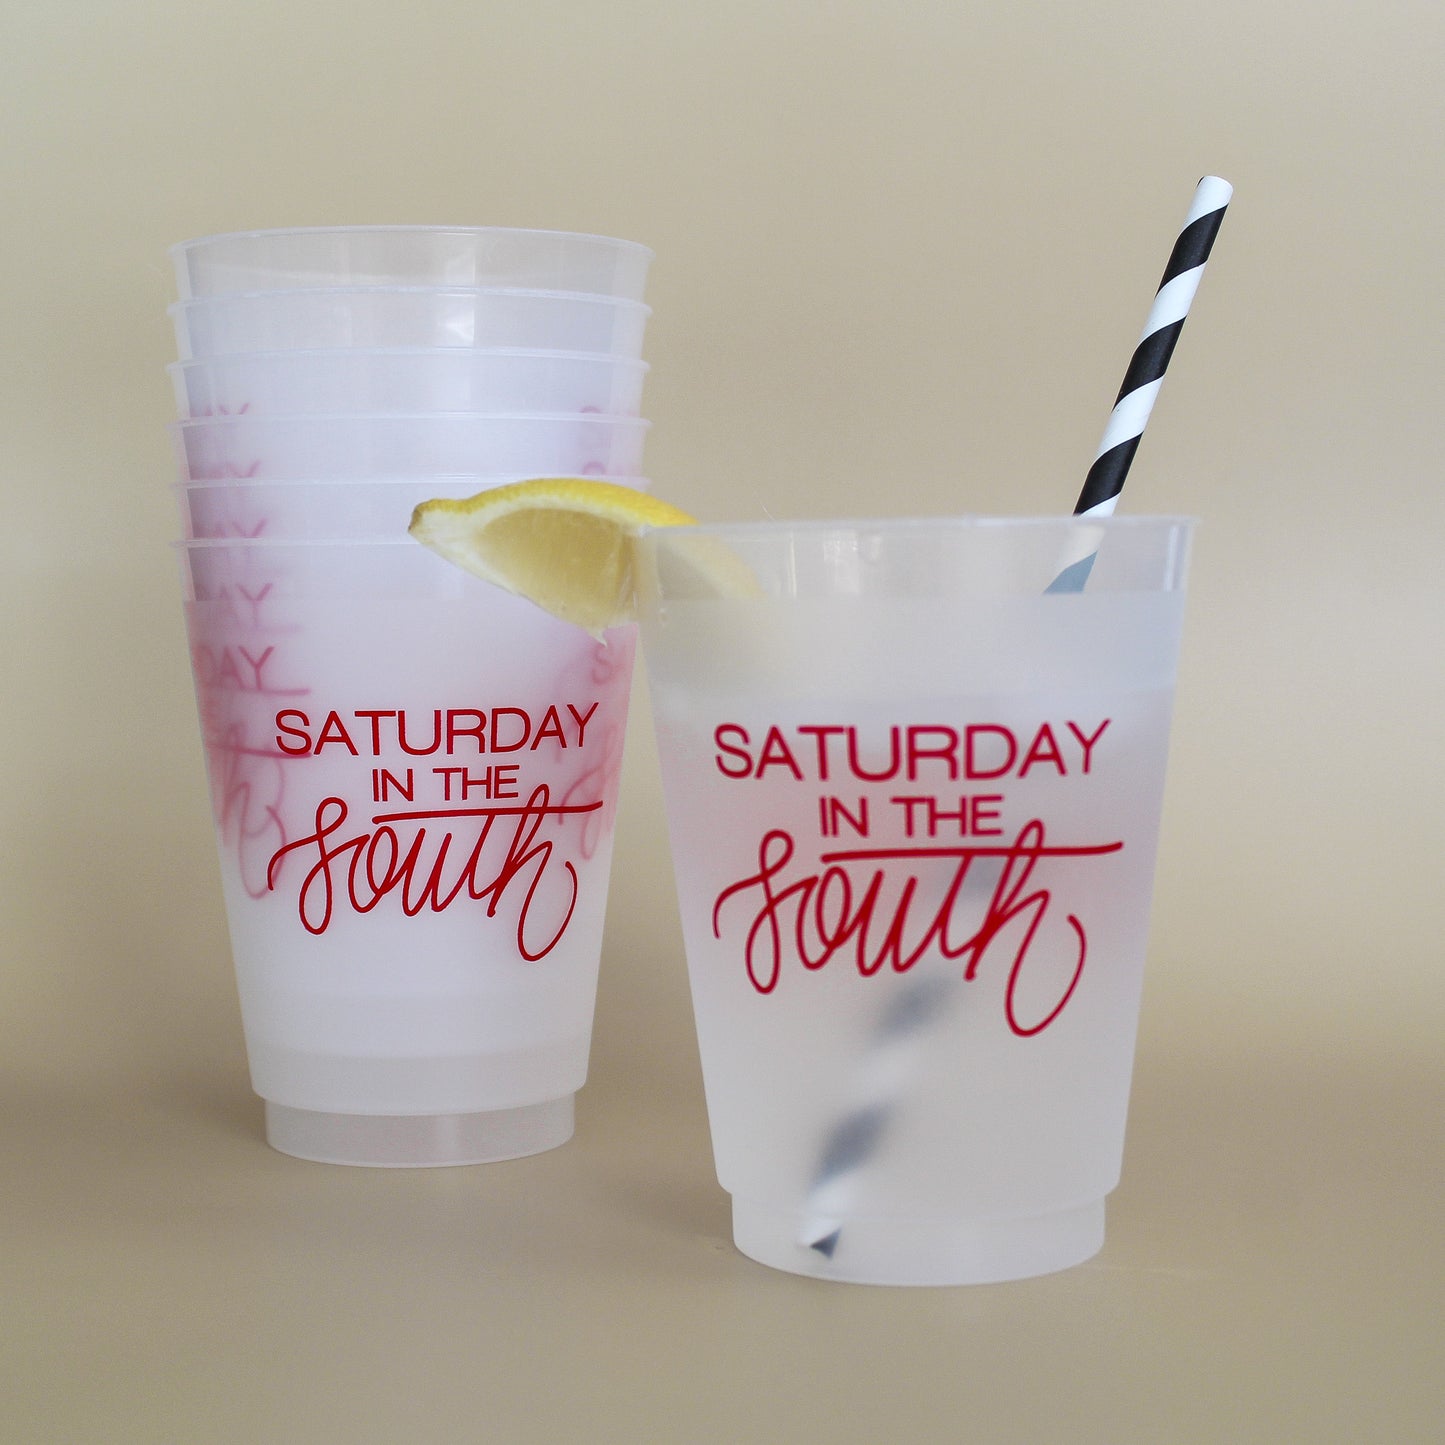 red 'Saturday In The South' cup, Tailgate party Cup, Football party cup